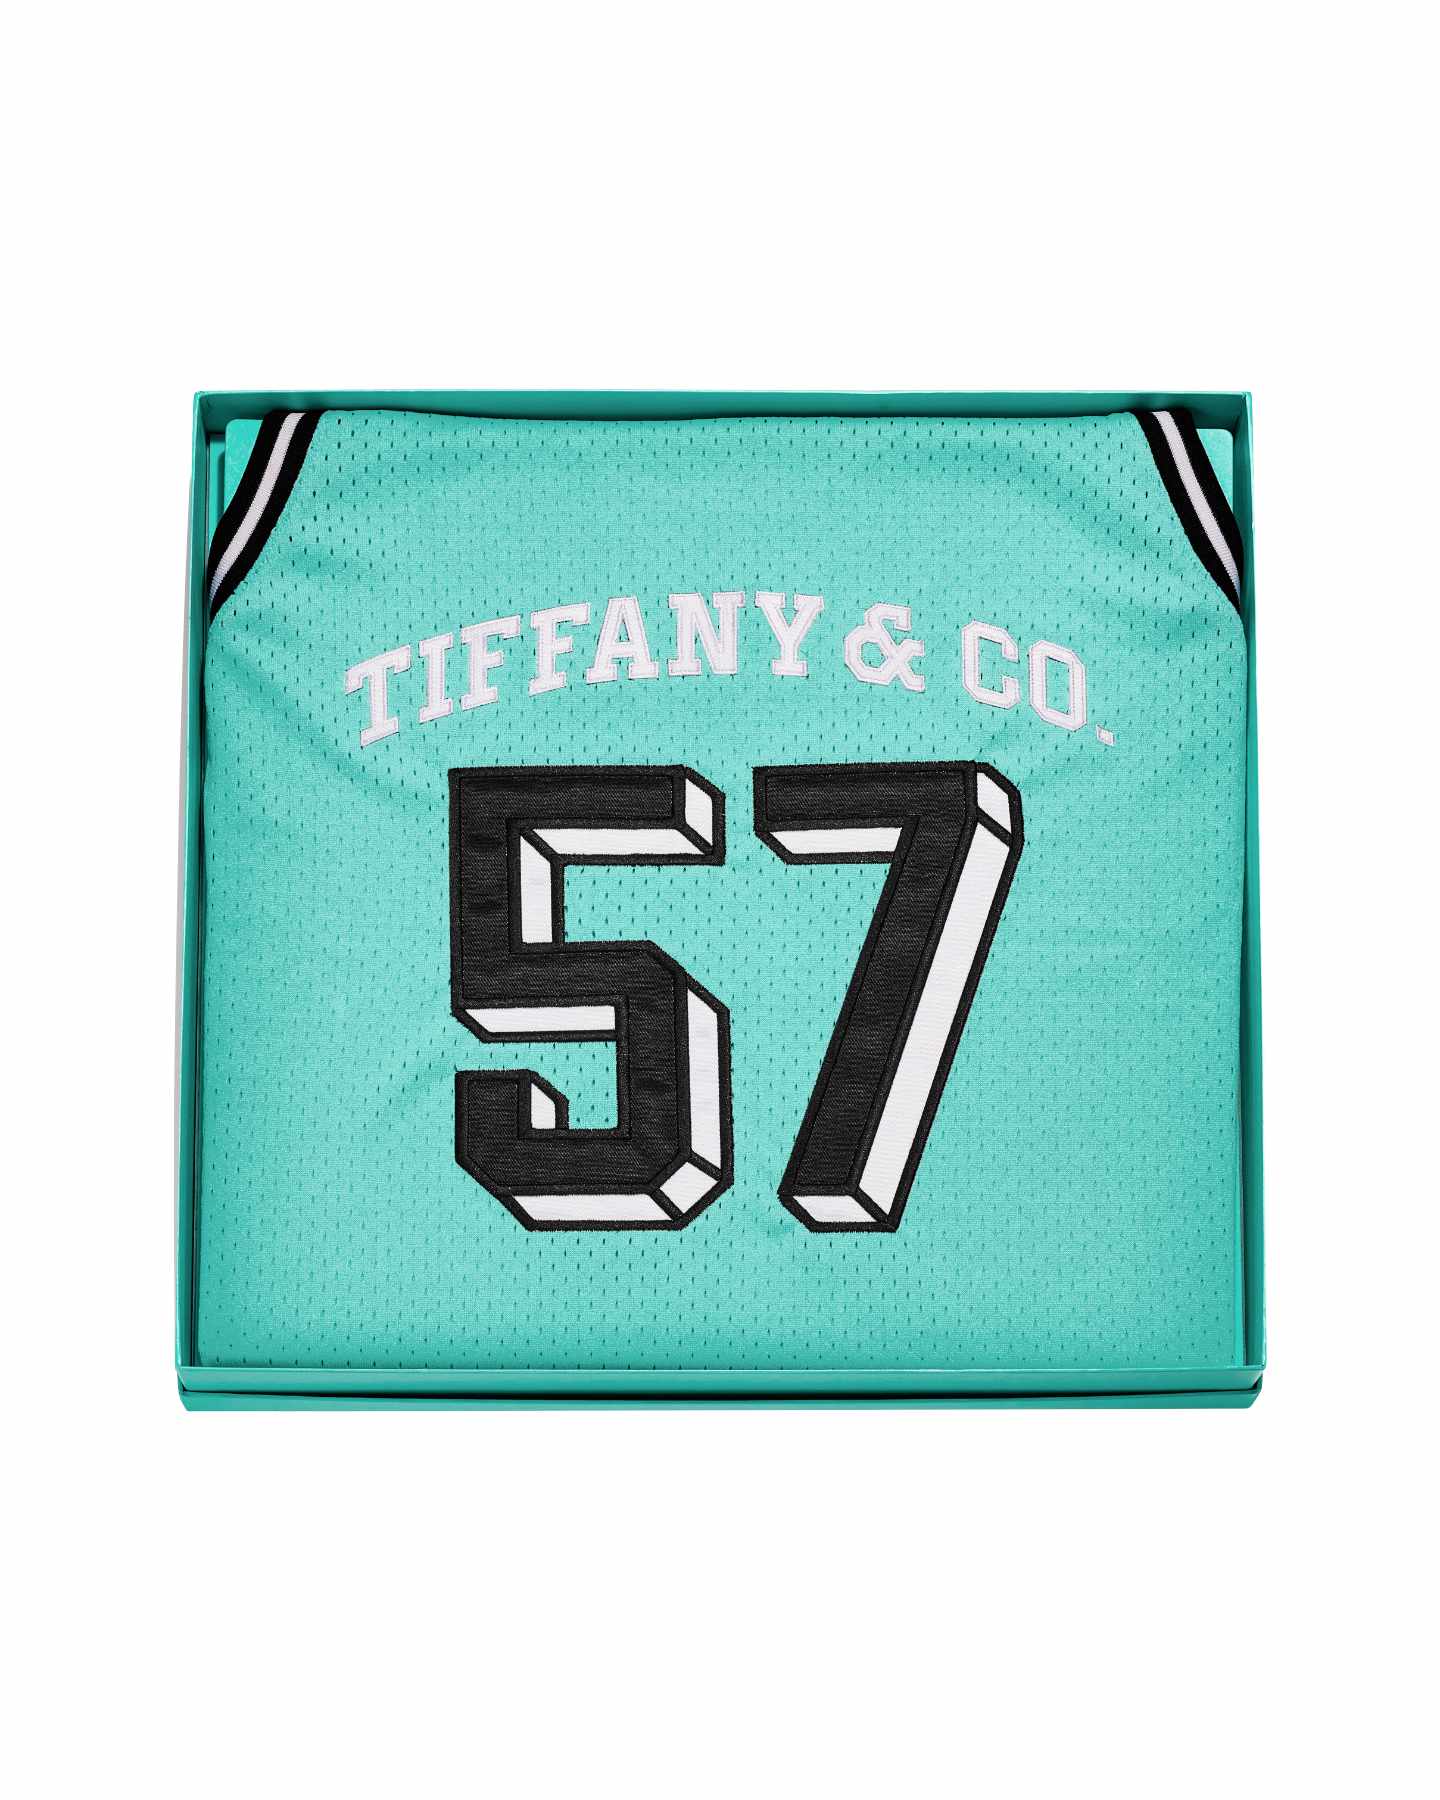 Tiffany & Co. Is NBA-Ready With Basketball, Jersey Collab